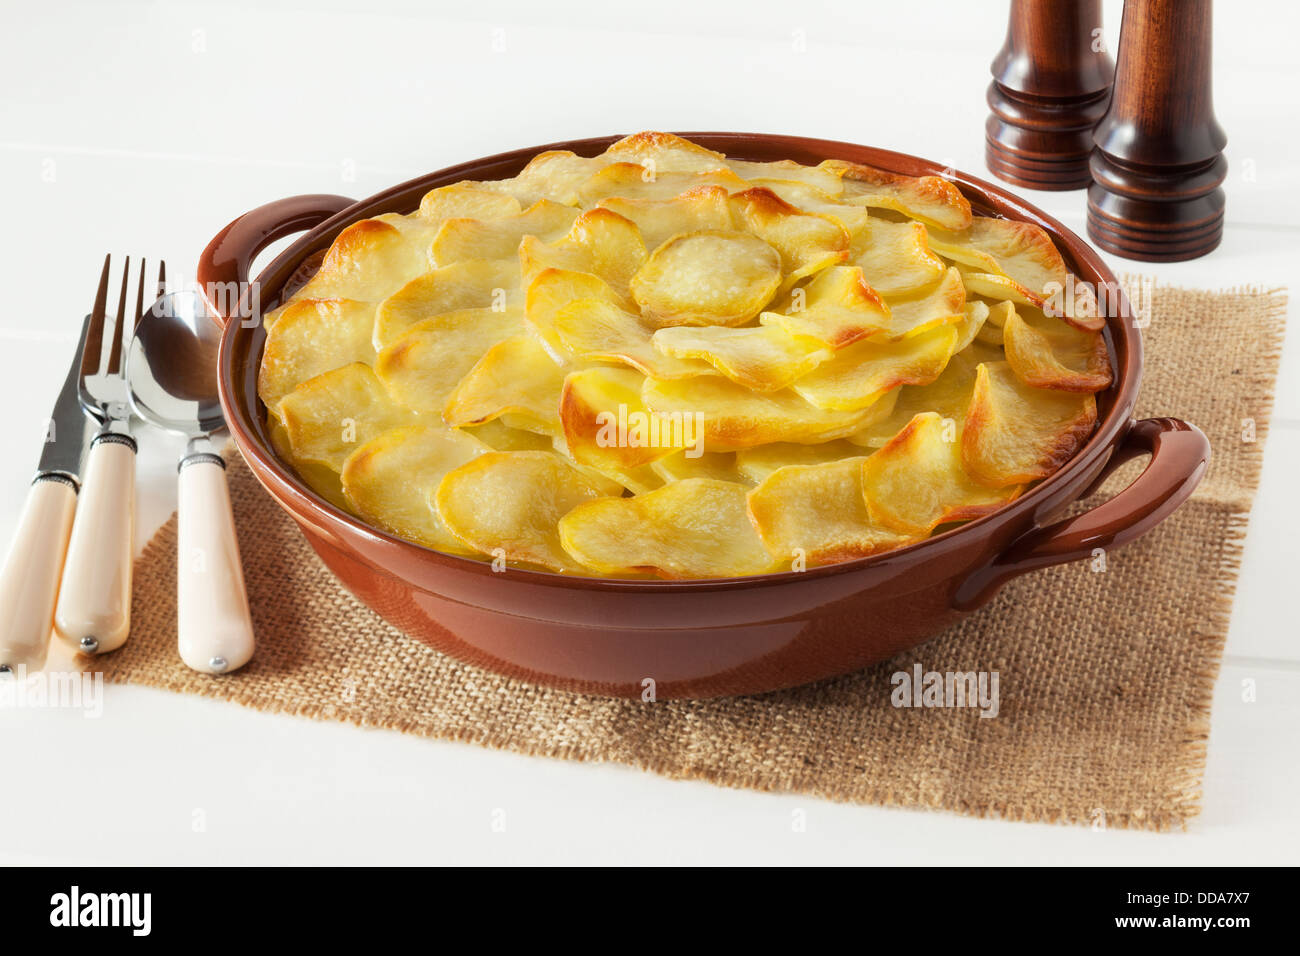 Lancashire Hotpot - regional speciality Lancashire Hot Pot, lamb and vegetables topped with sliced potatoes and oven baked... Stock Photo